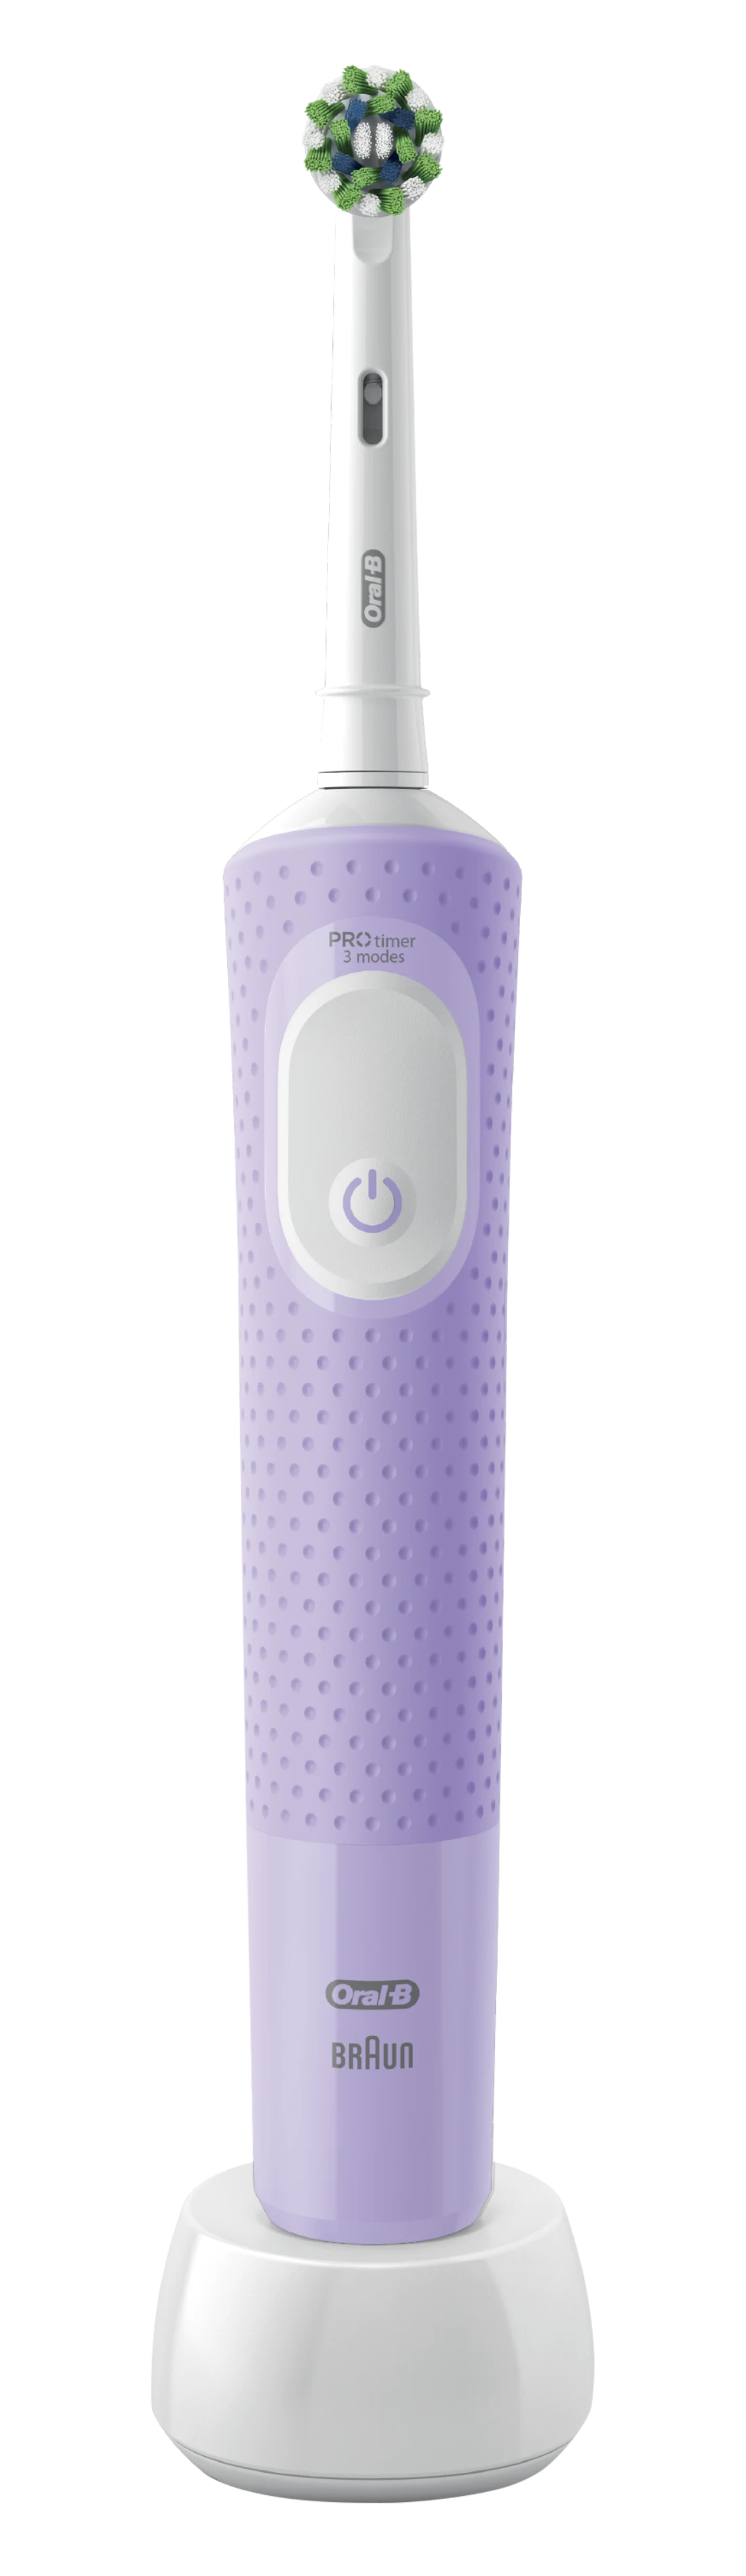 Oral-B Vitality PRO Black & Lilac Electric Toothbrushes